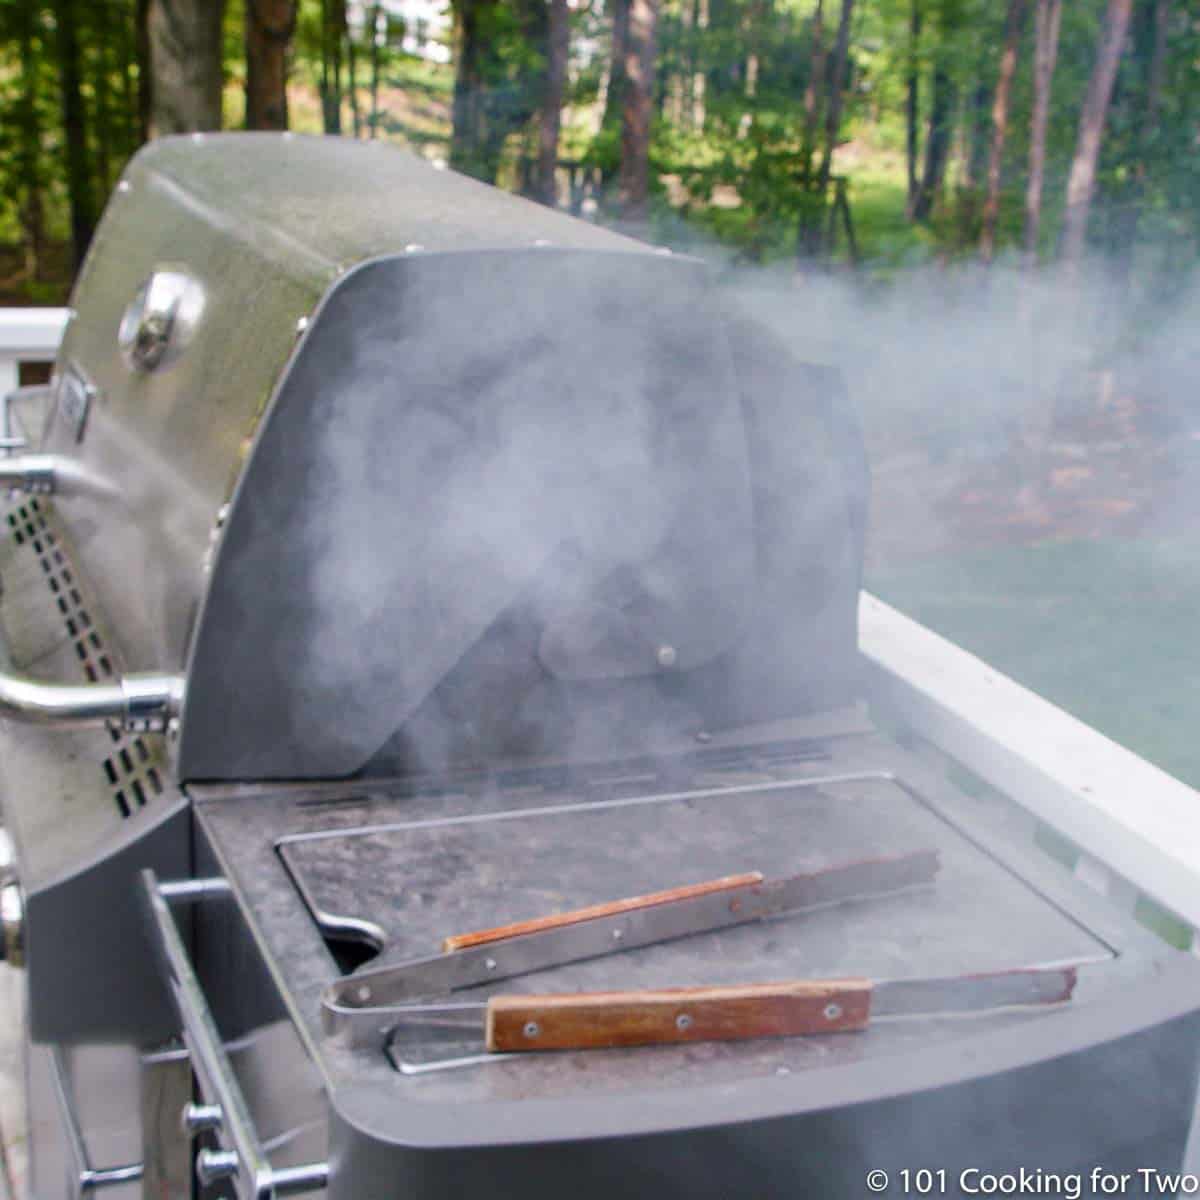 https://www.101cookingfortwo.com/wp-content/uploads/2019/04/image-of-smoking-gas-grill.jpg